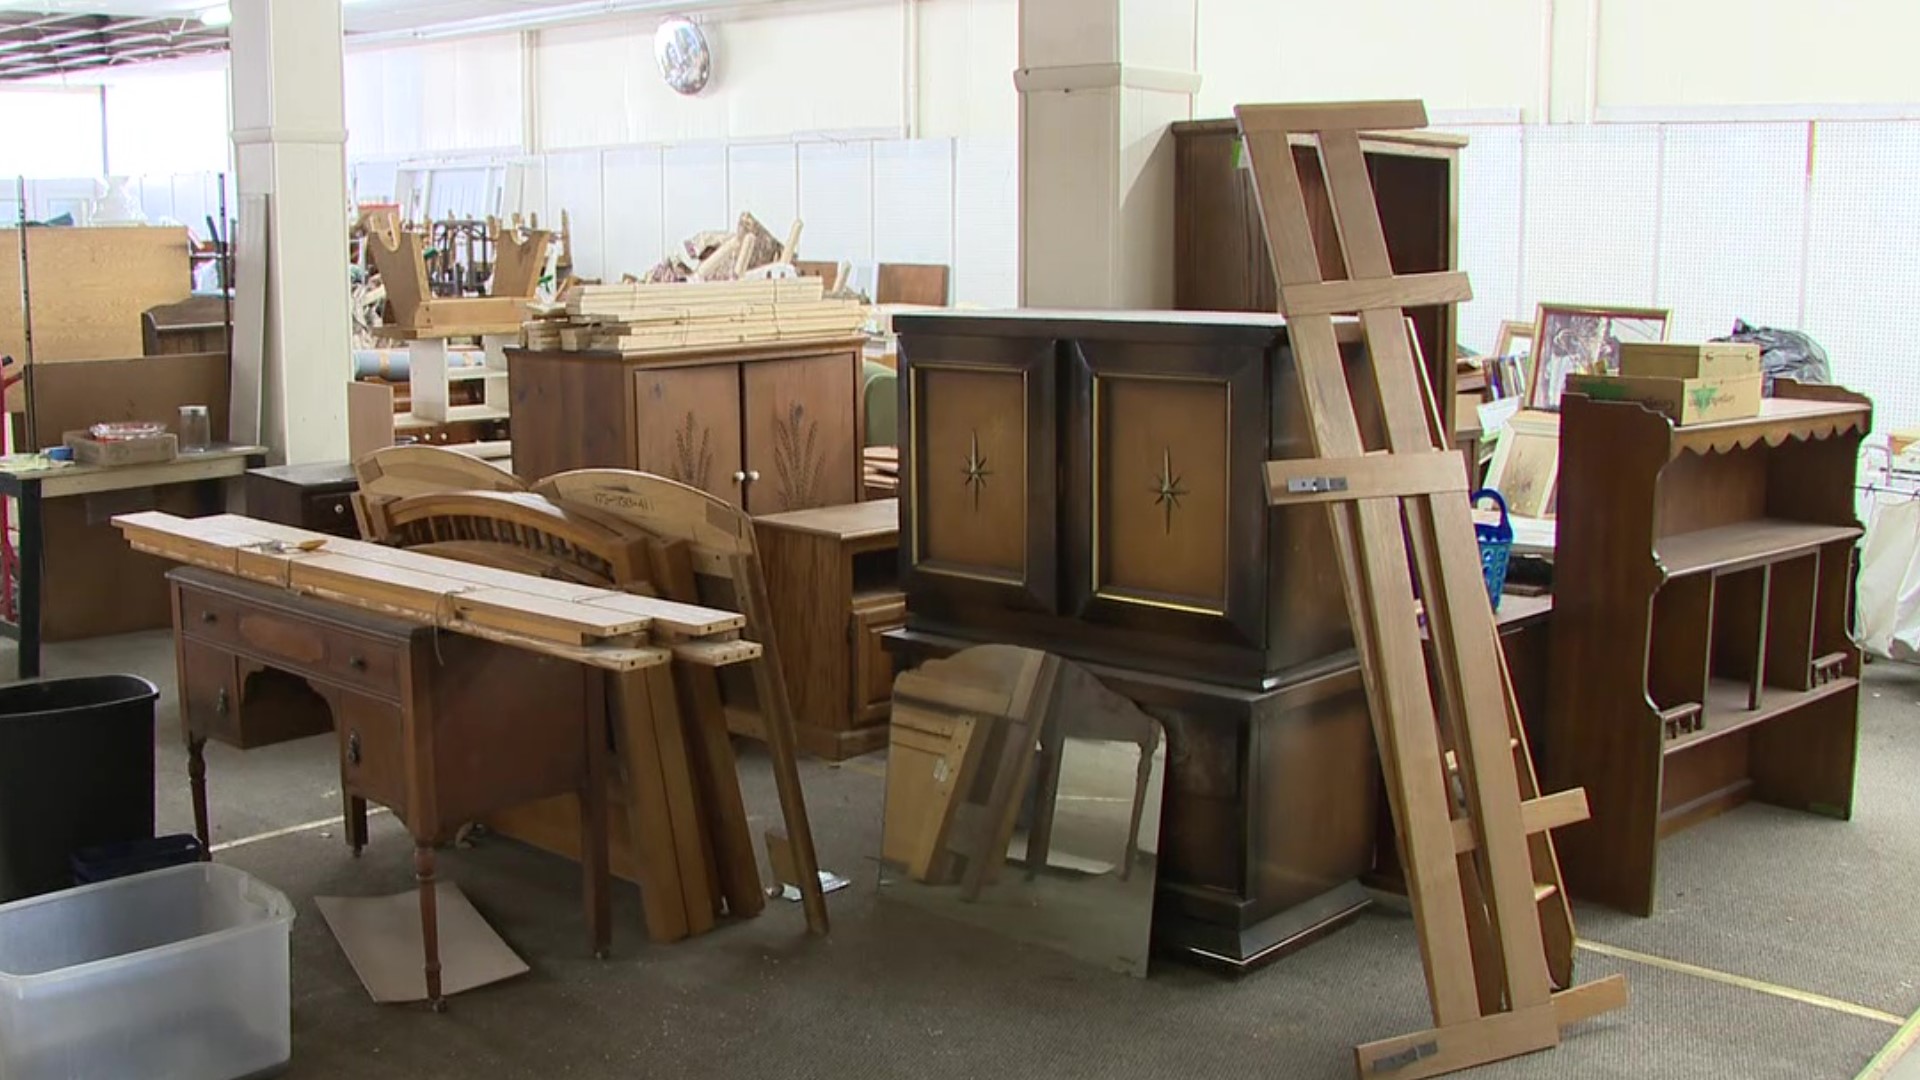 DIG Furniture Bank provides free furniture to people in need.